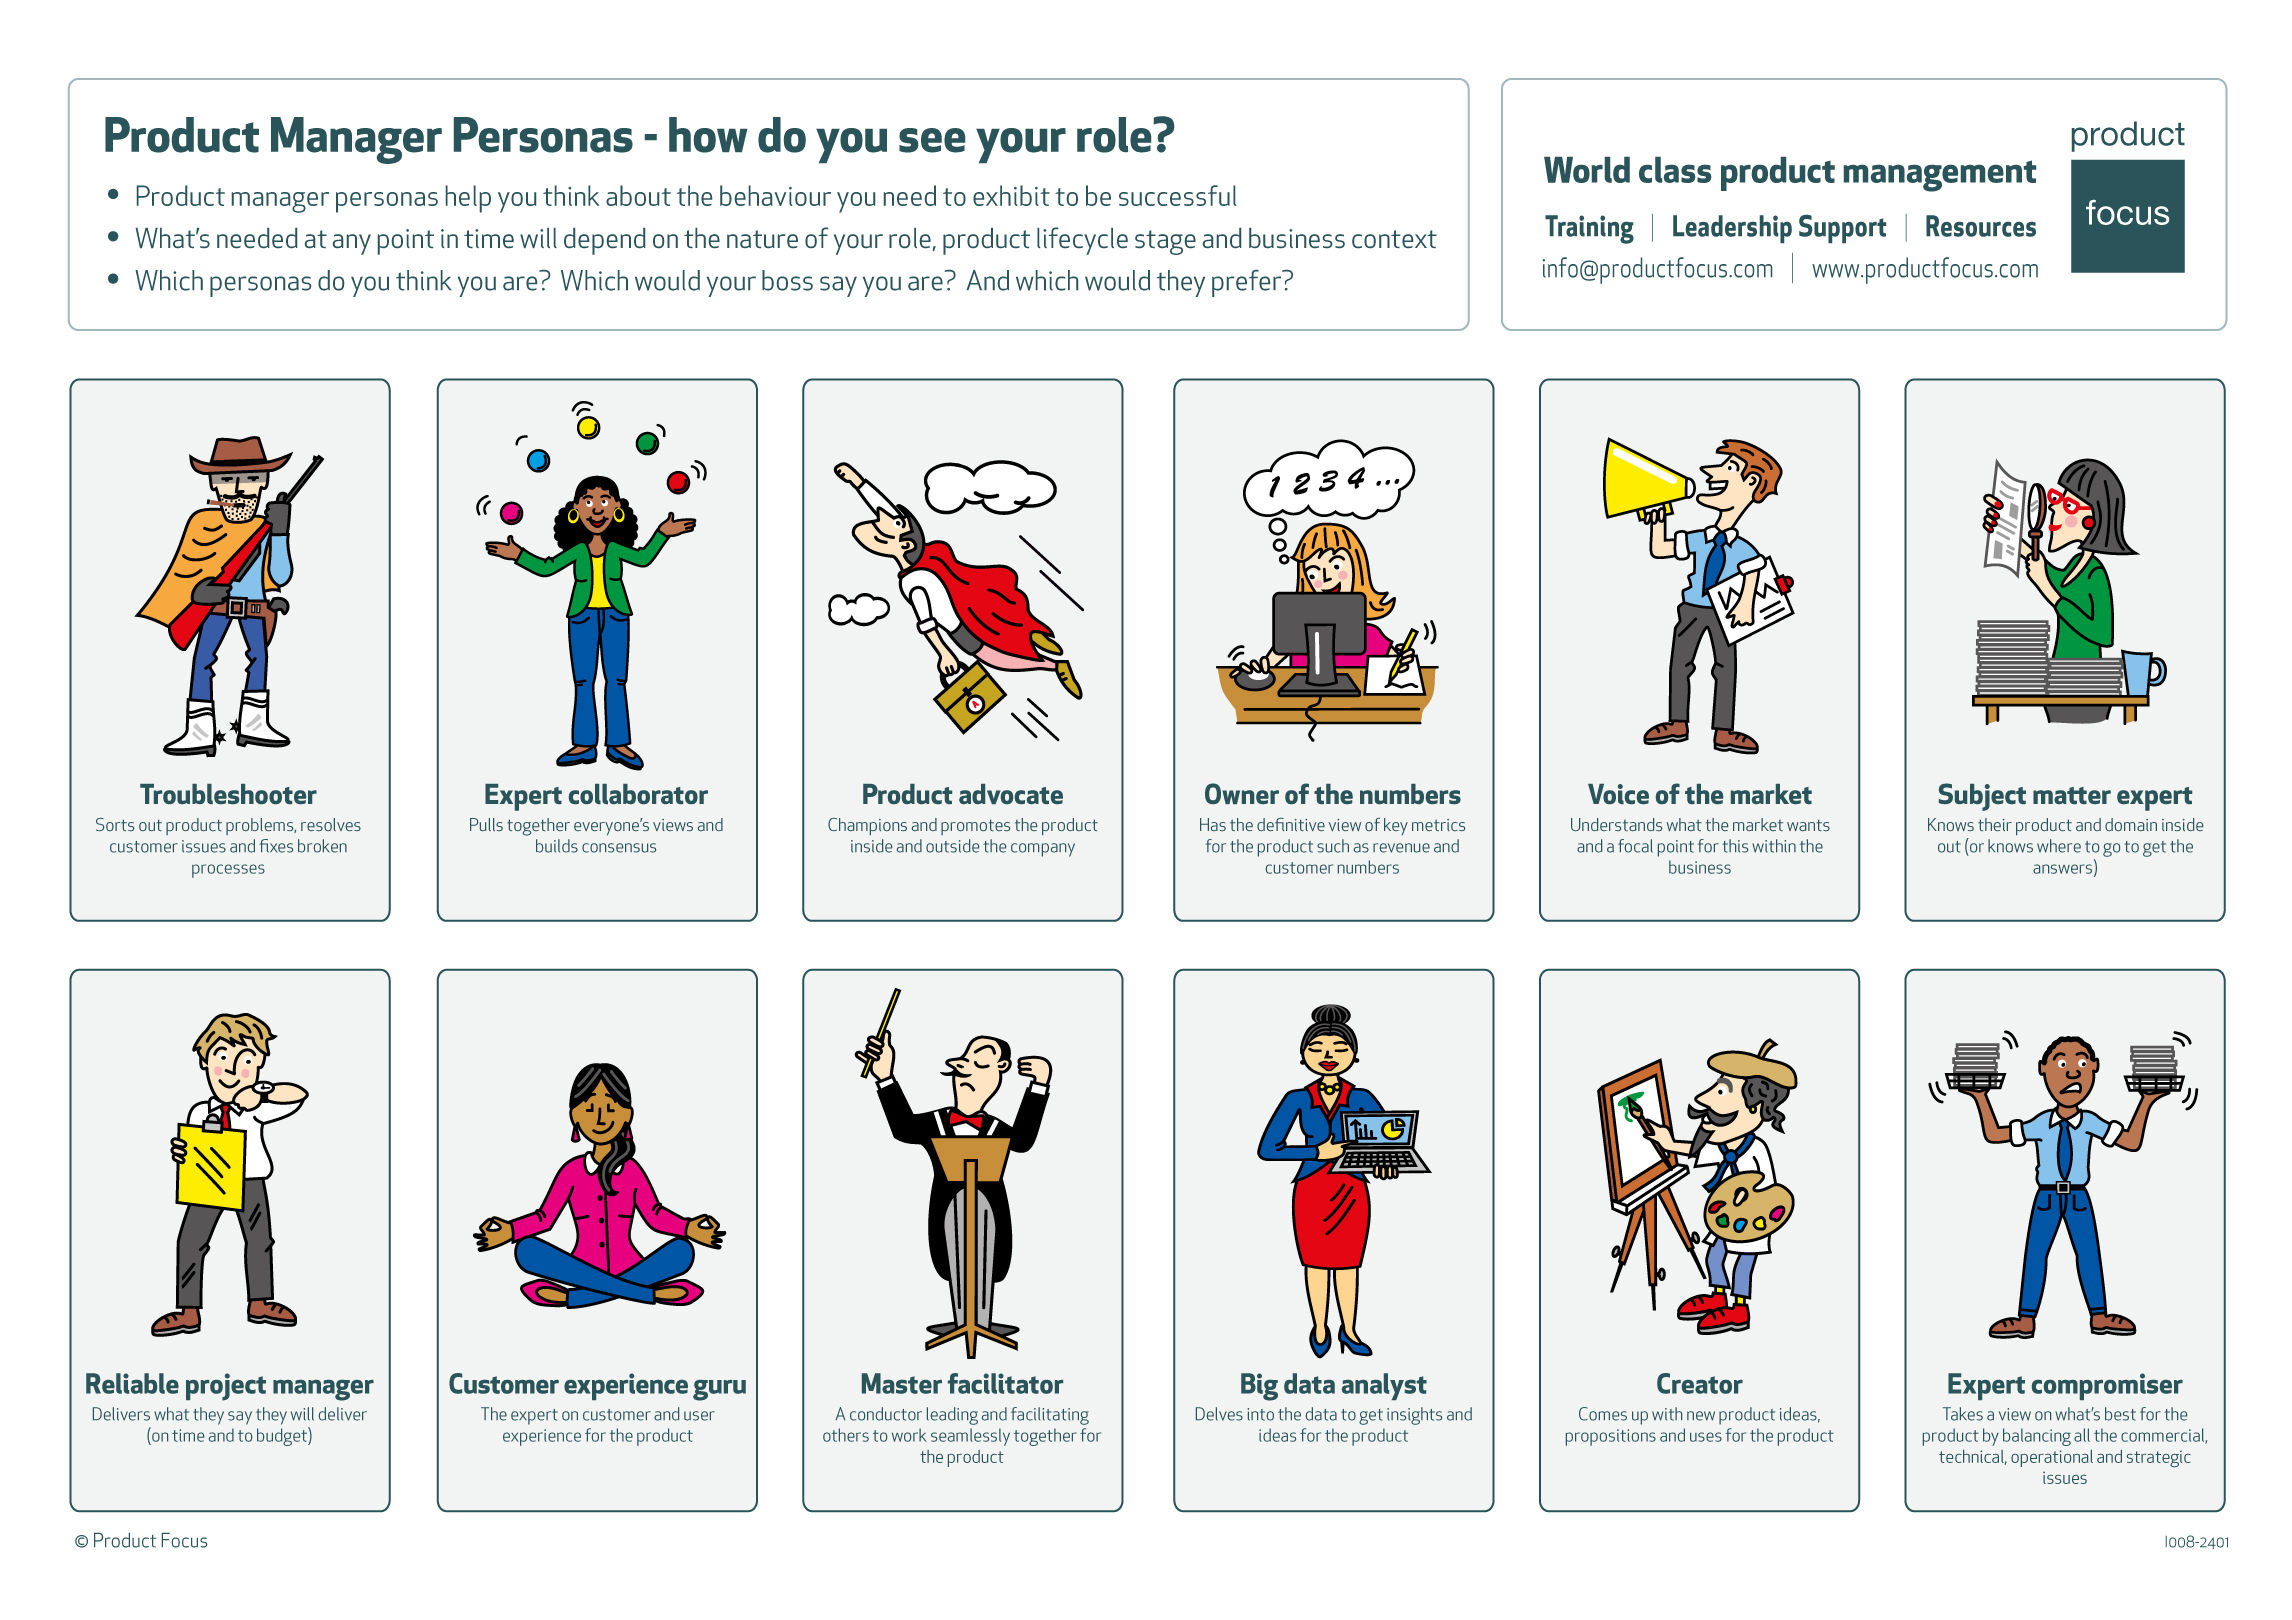 Product Manager Personas